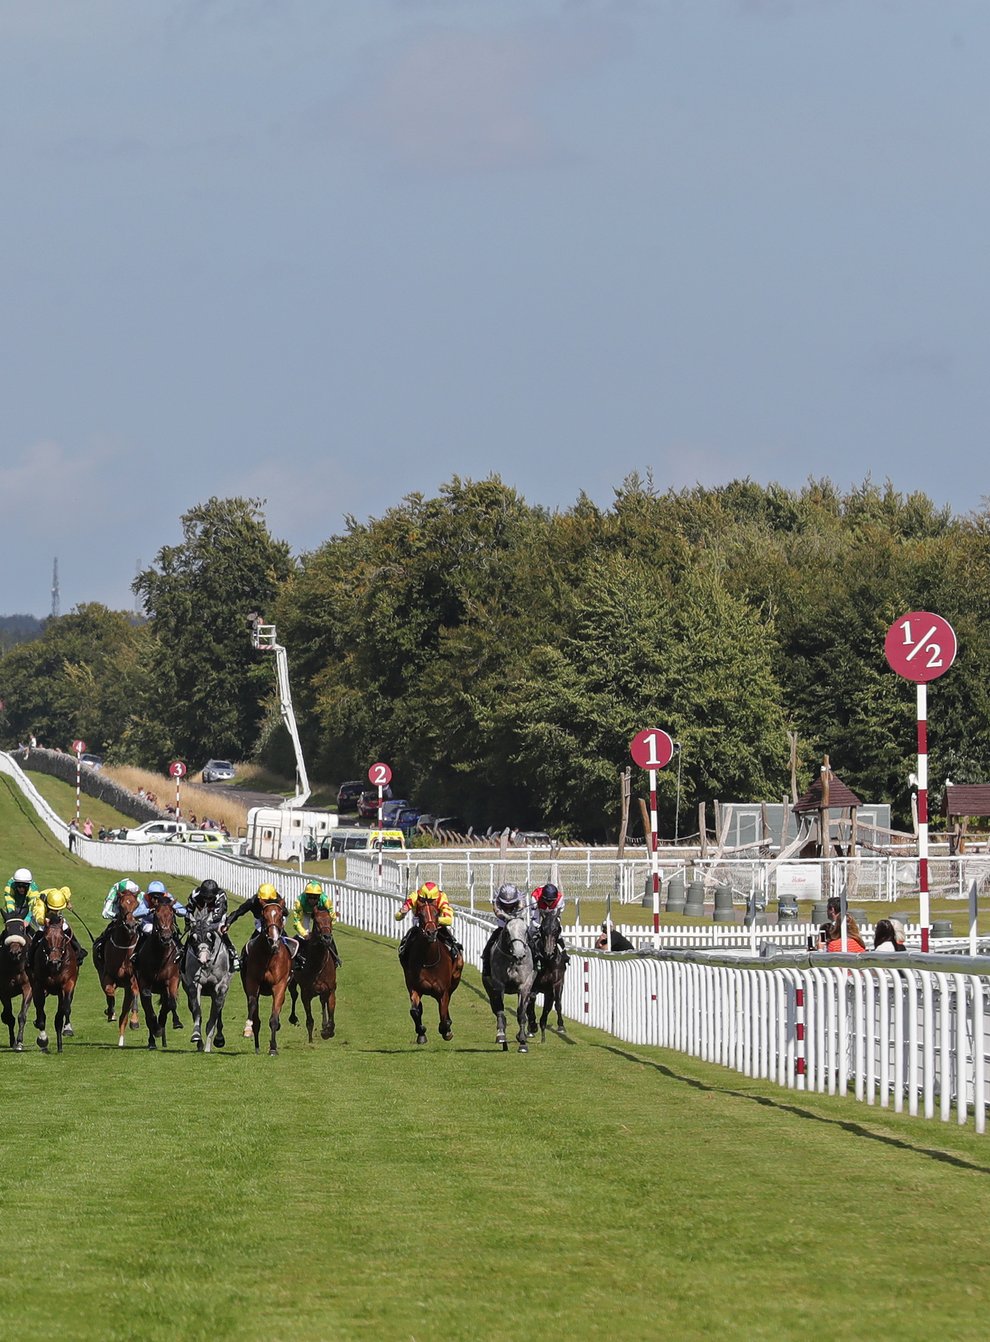 Runners and riders in action at Goodwood